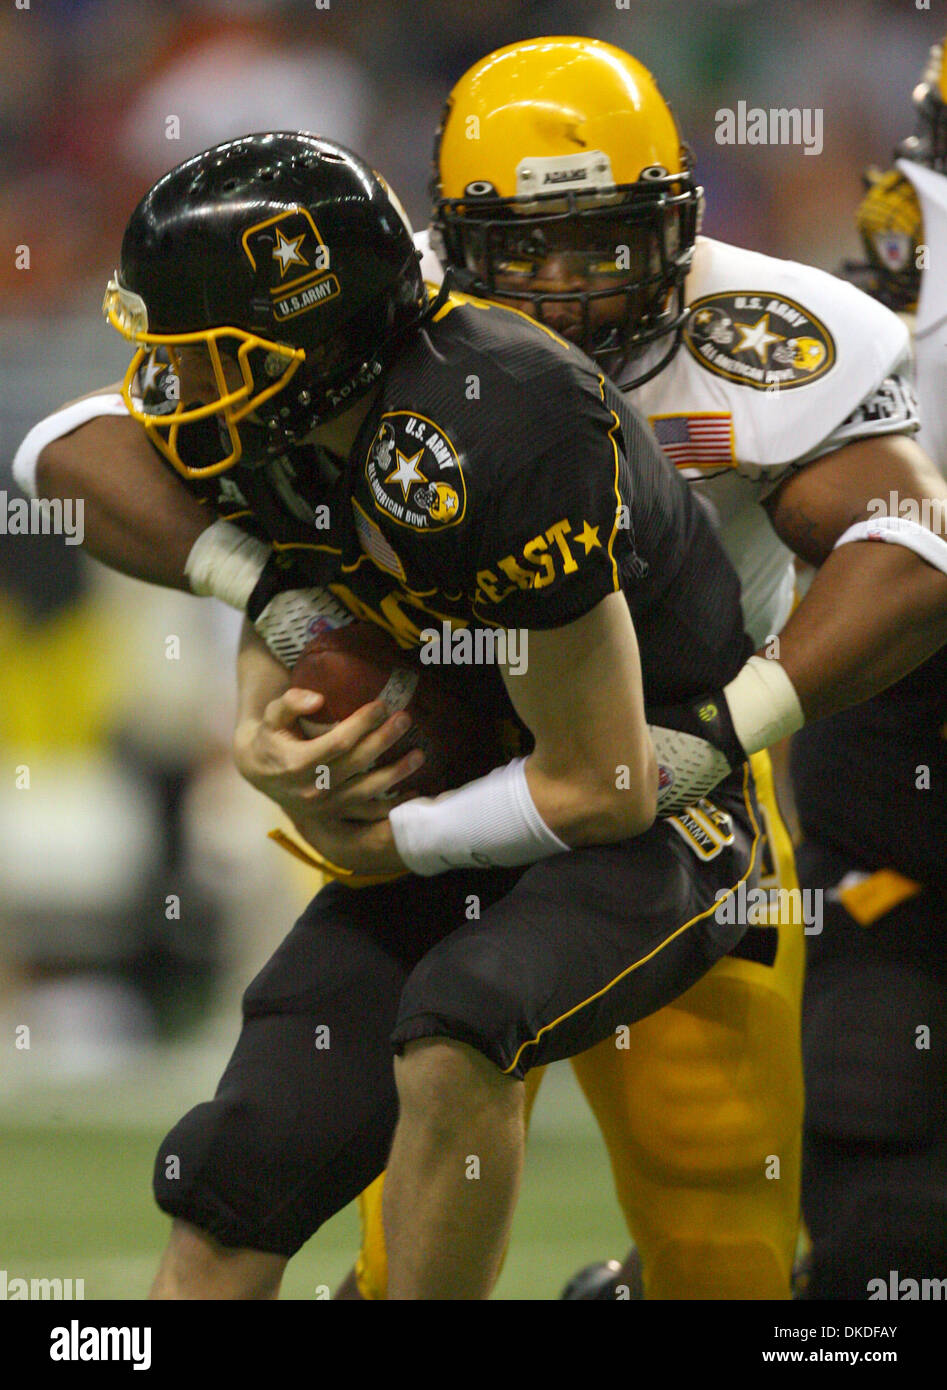 Jan 06, 2007 - San Antonio, TX, USA - 2007 US Army All-American Bowl. East squad's MATT SIMMS is sacked by West squad's EVERSON GRIFFIN Saturday Jan. 6, 2007 at the Alamodome. The West squad went on to win 24-7. Stock Photo